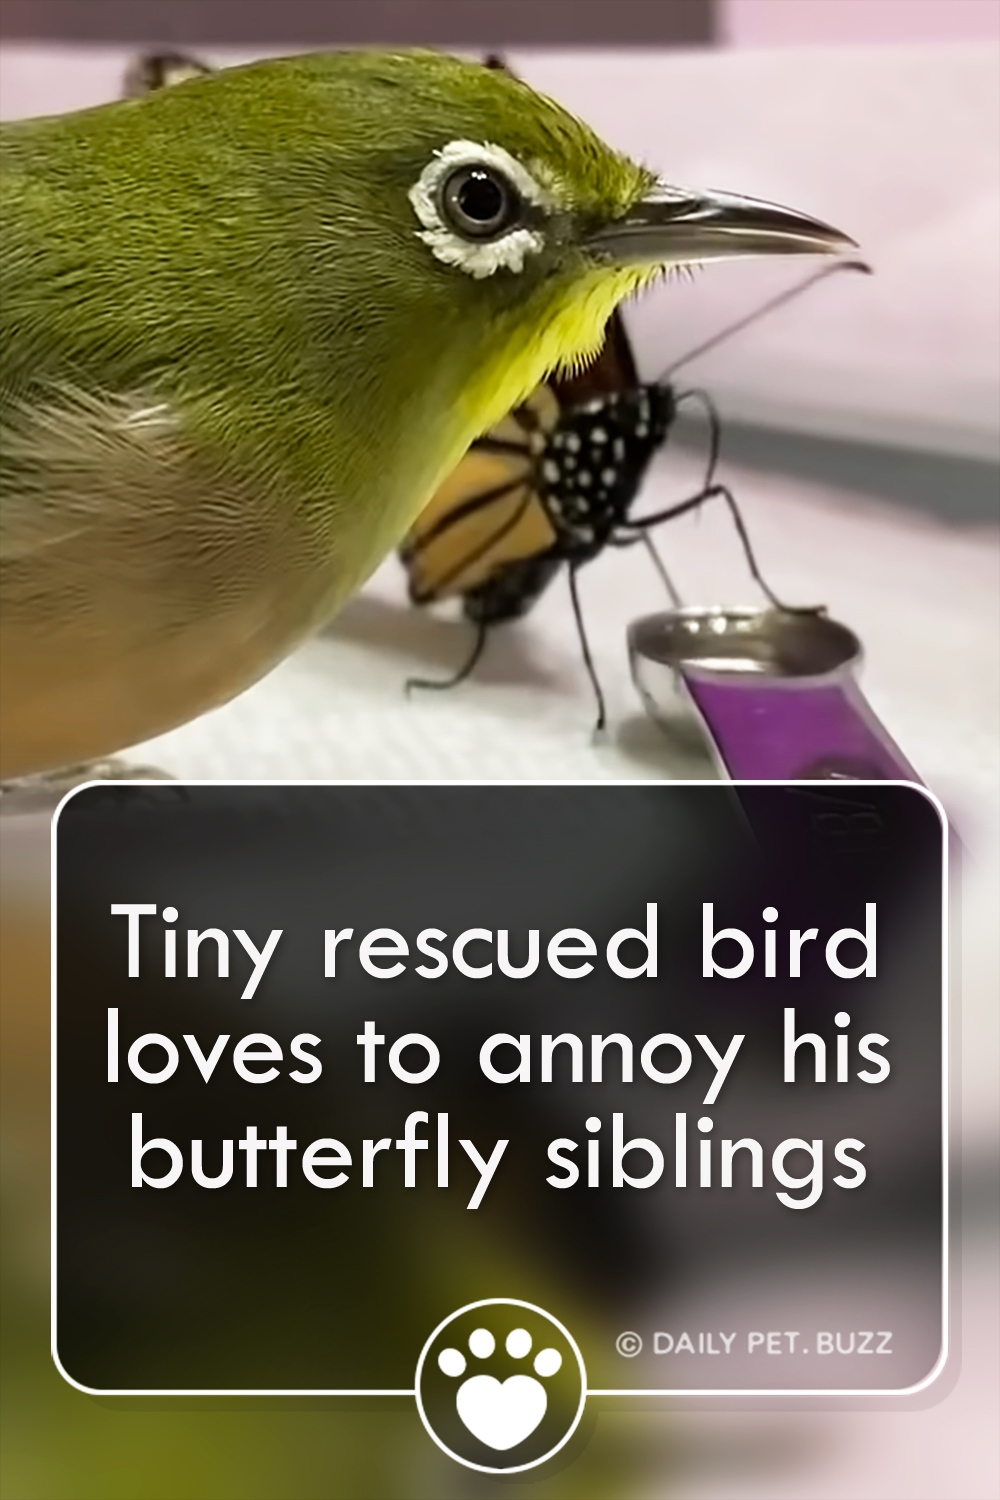 Tiny rescued bird loves to annoy his butterfly siblings